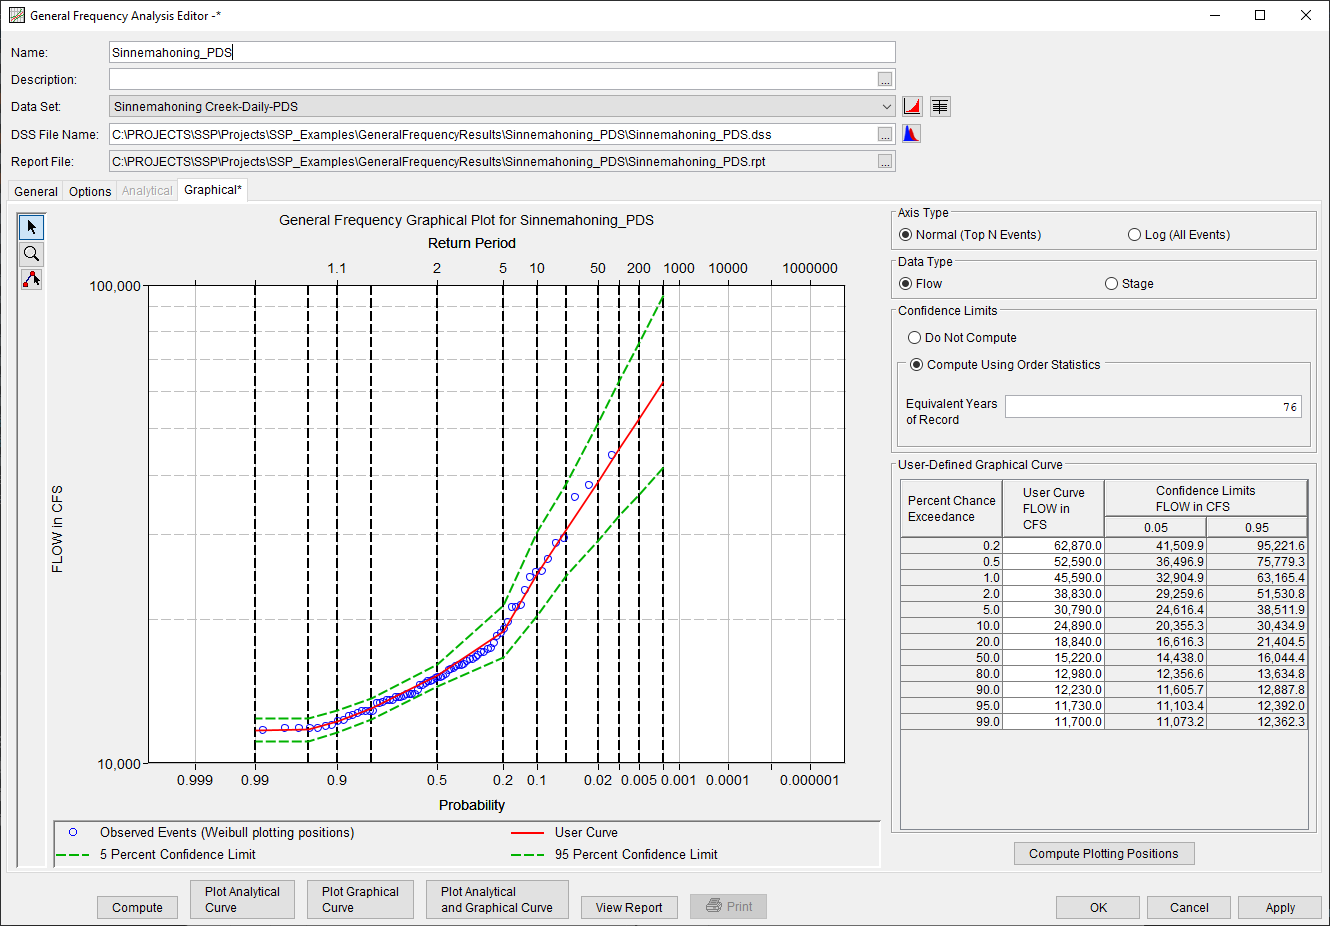 Figure 2a. Normal Axis Type Option Selected on the Graphical Tab.